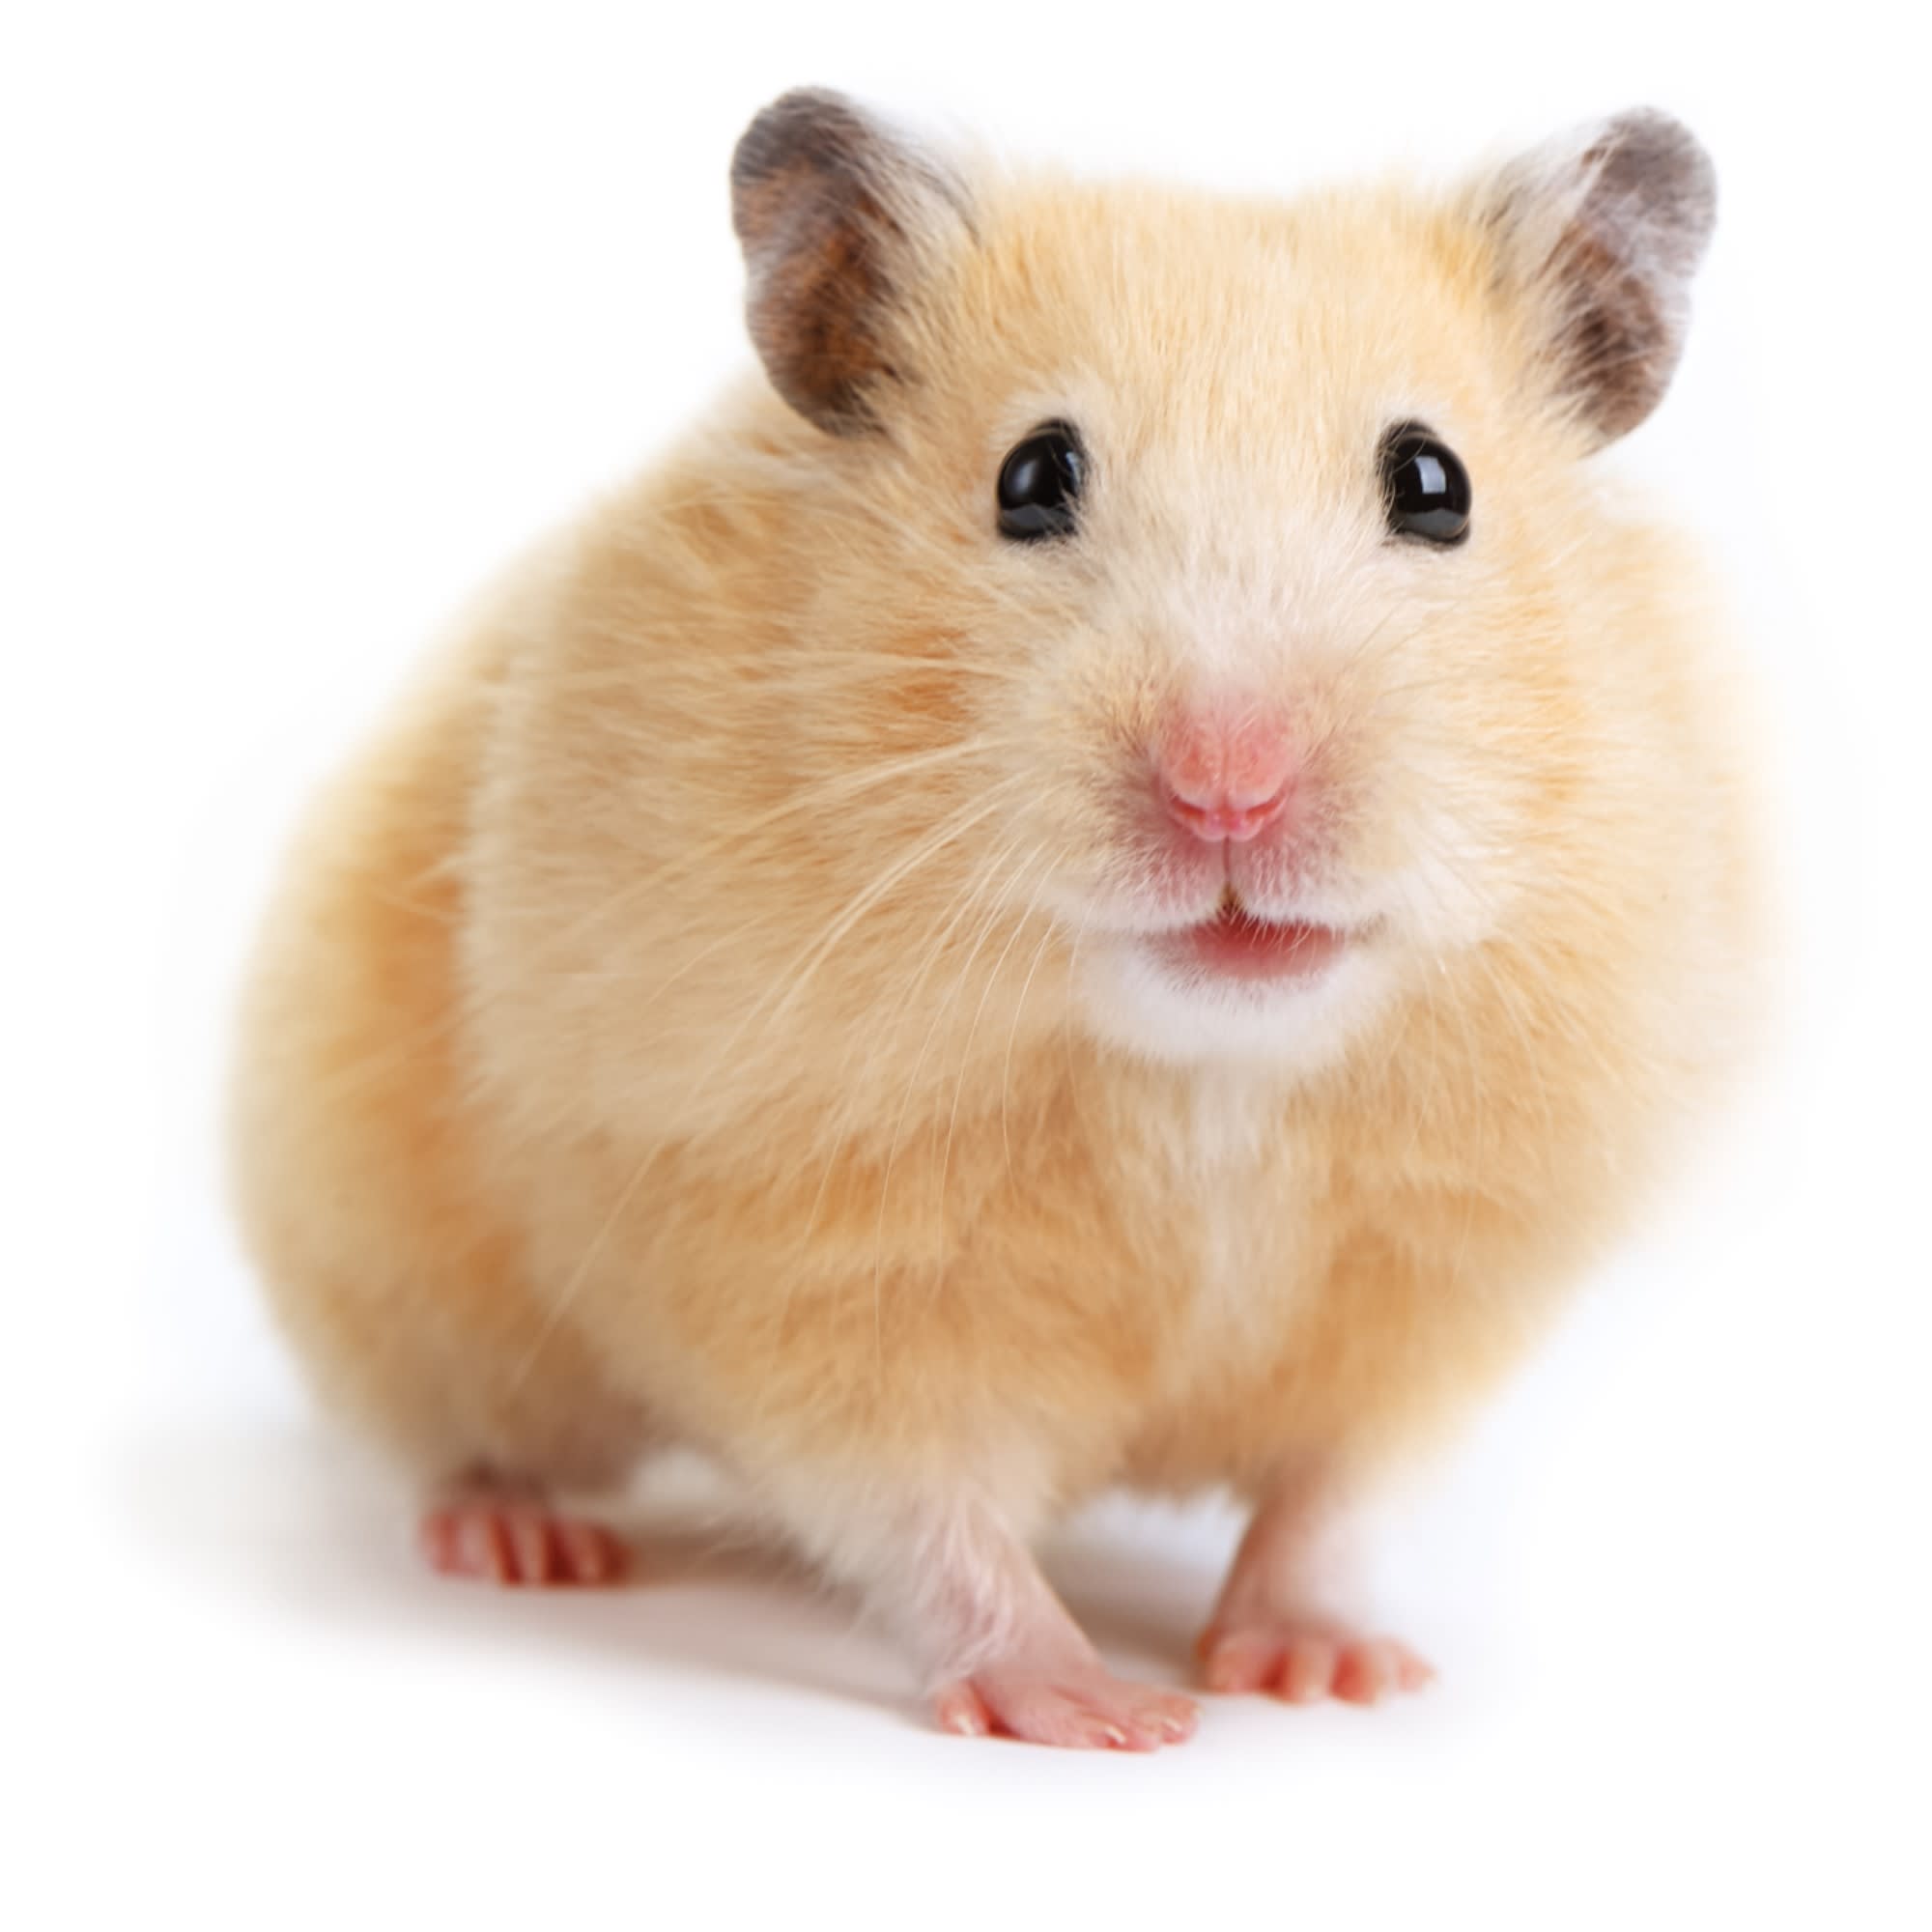 Syrian Hamster Animal Facts  Mesocricetus auratus - A-Z Animals